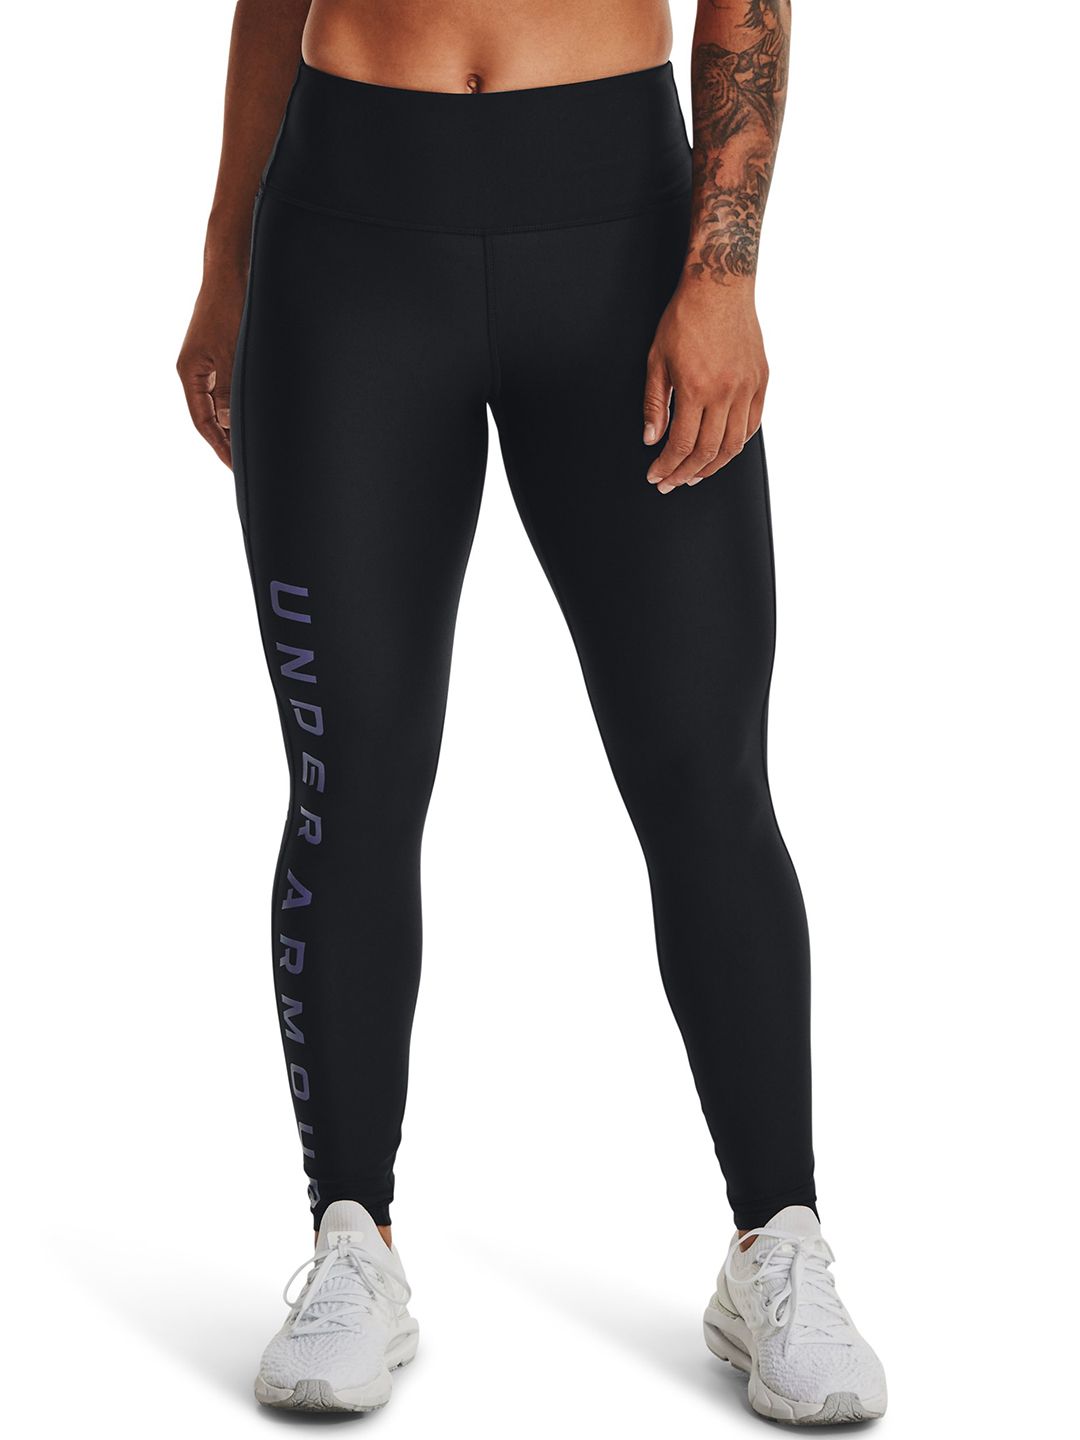 UNDER ARMOUR Women Black Heat Gear High-Rise No-Slip Waistband Full-Length Tights Price in India